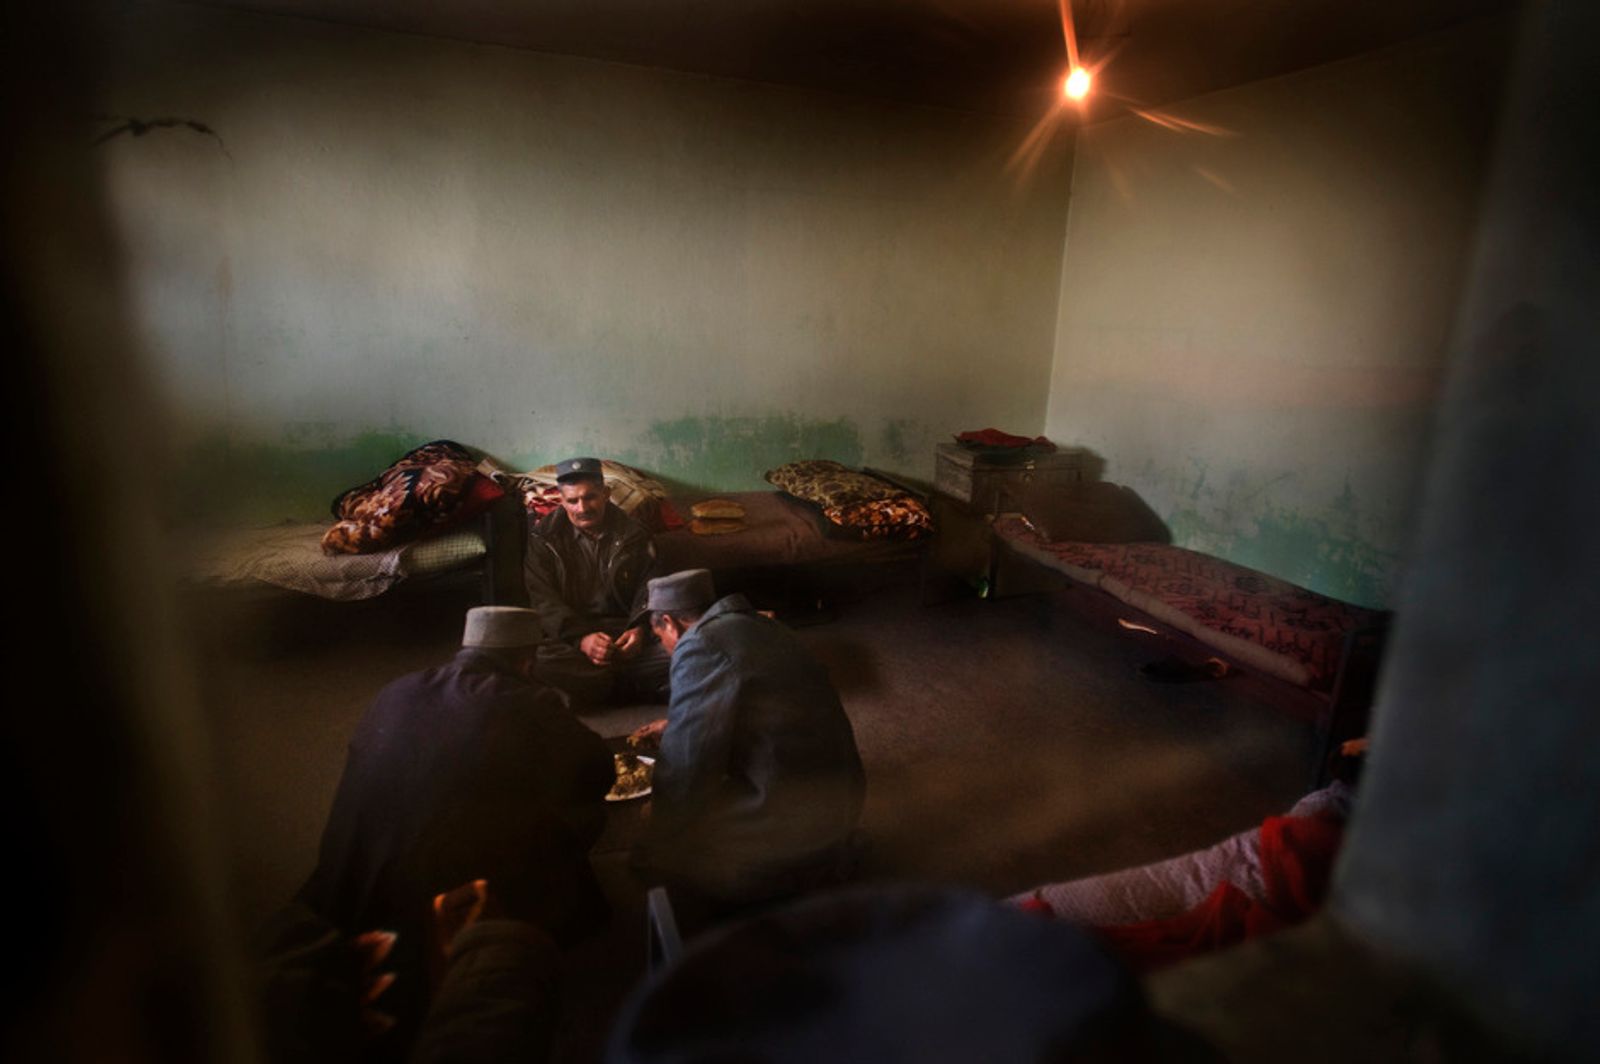 © Daniel Pilar - View inside the staffroom of the prison guards in the central prison of Kabul on january 30th 2010.